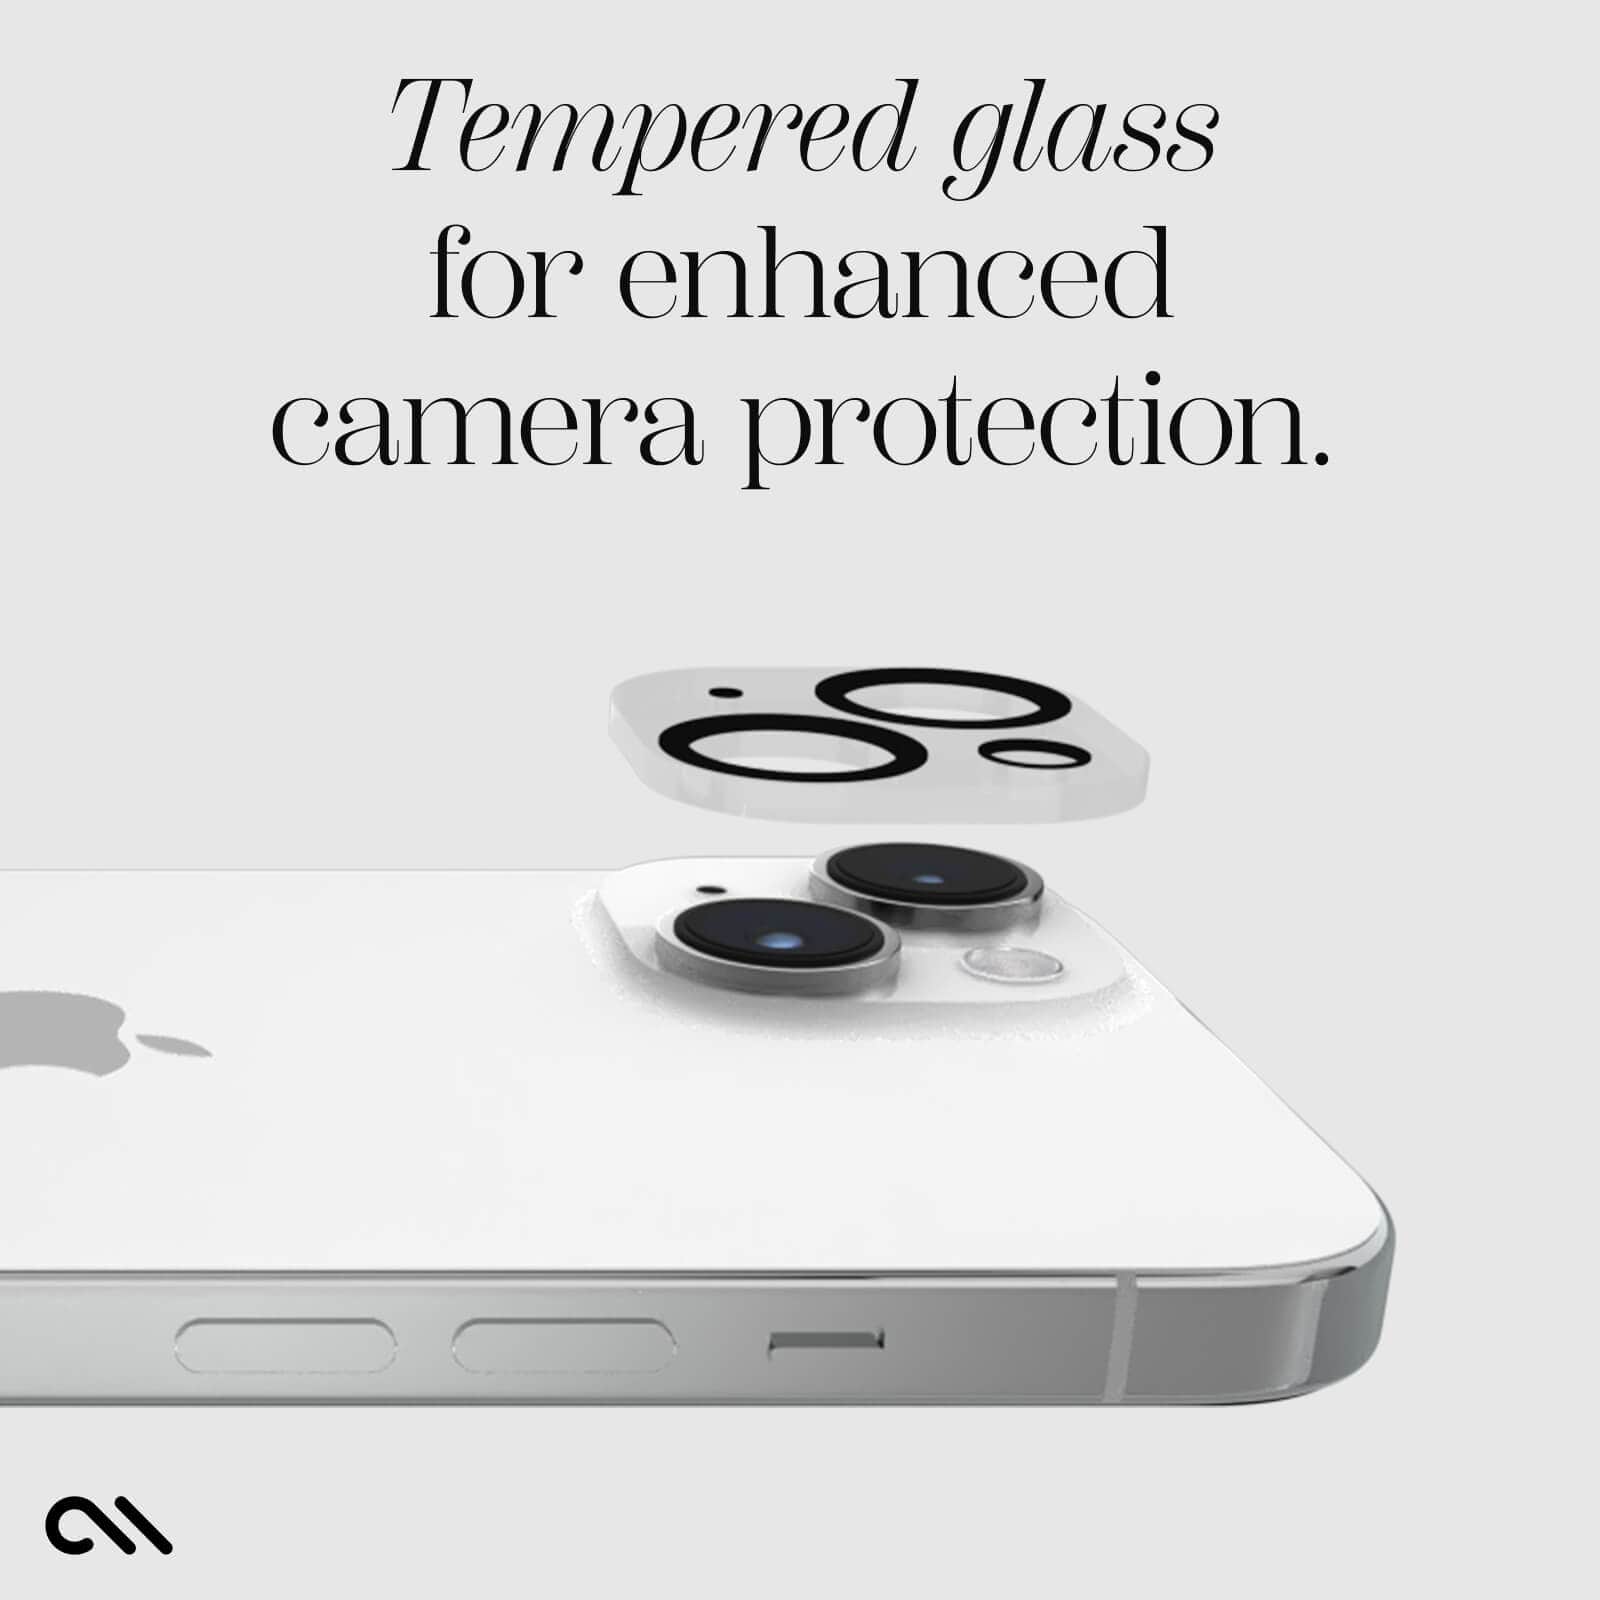 TEMPERED GLASS FOR ENHANCED CAMERA PROTECTION